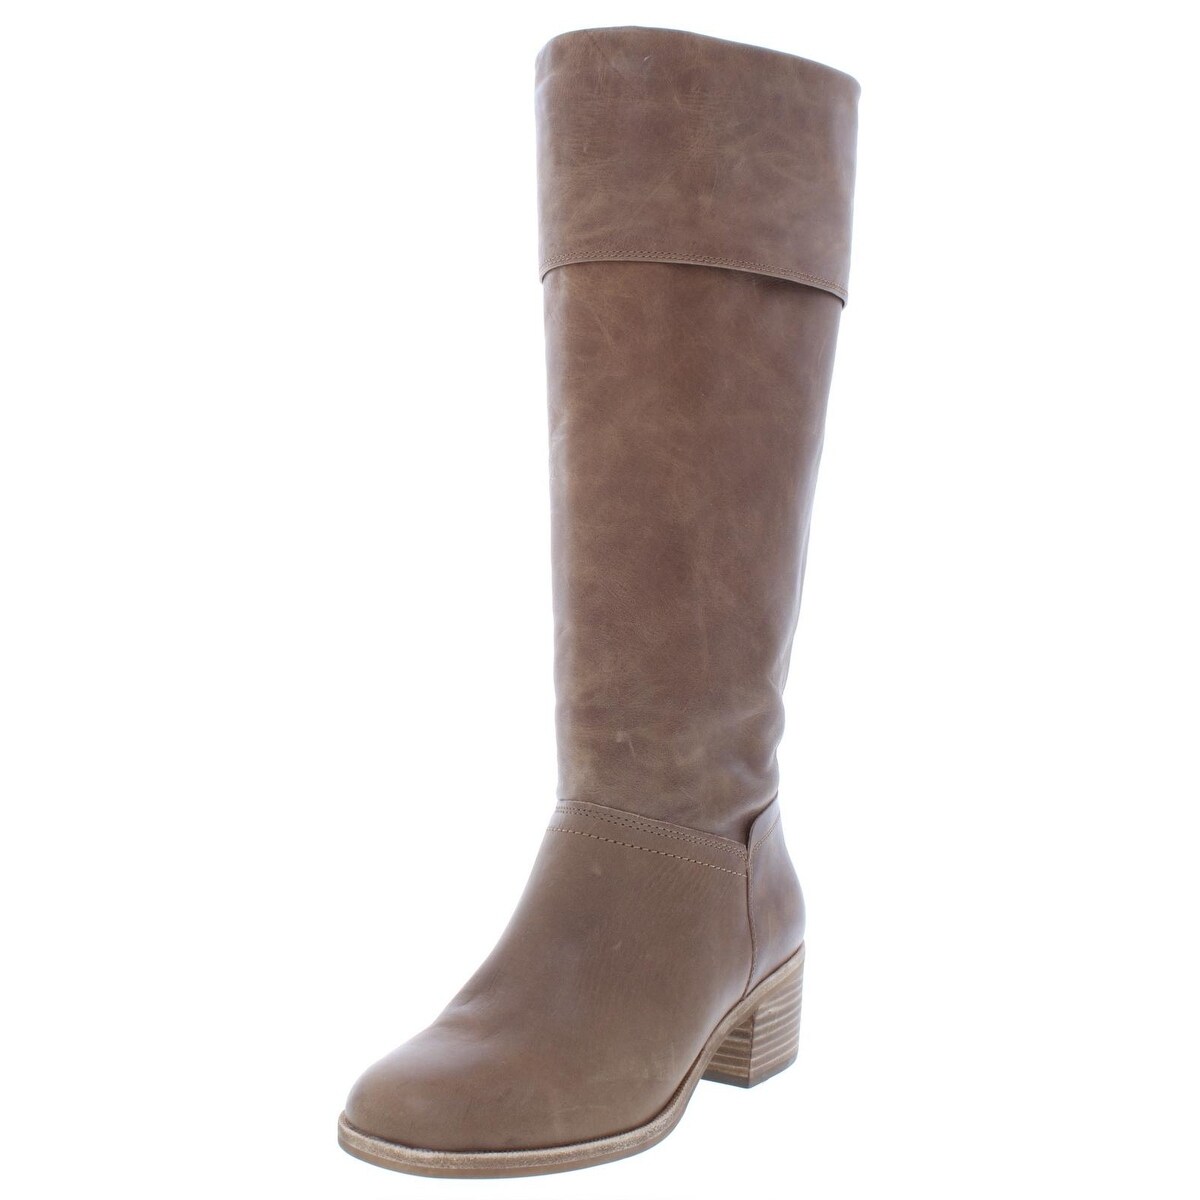 knee high ugg style boots